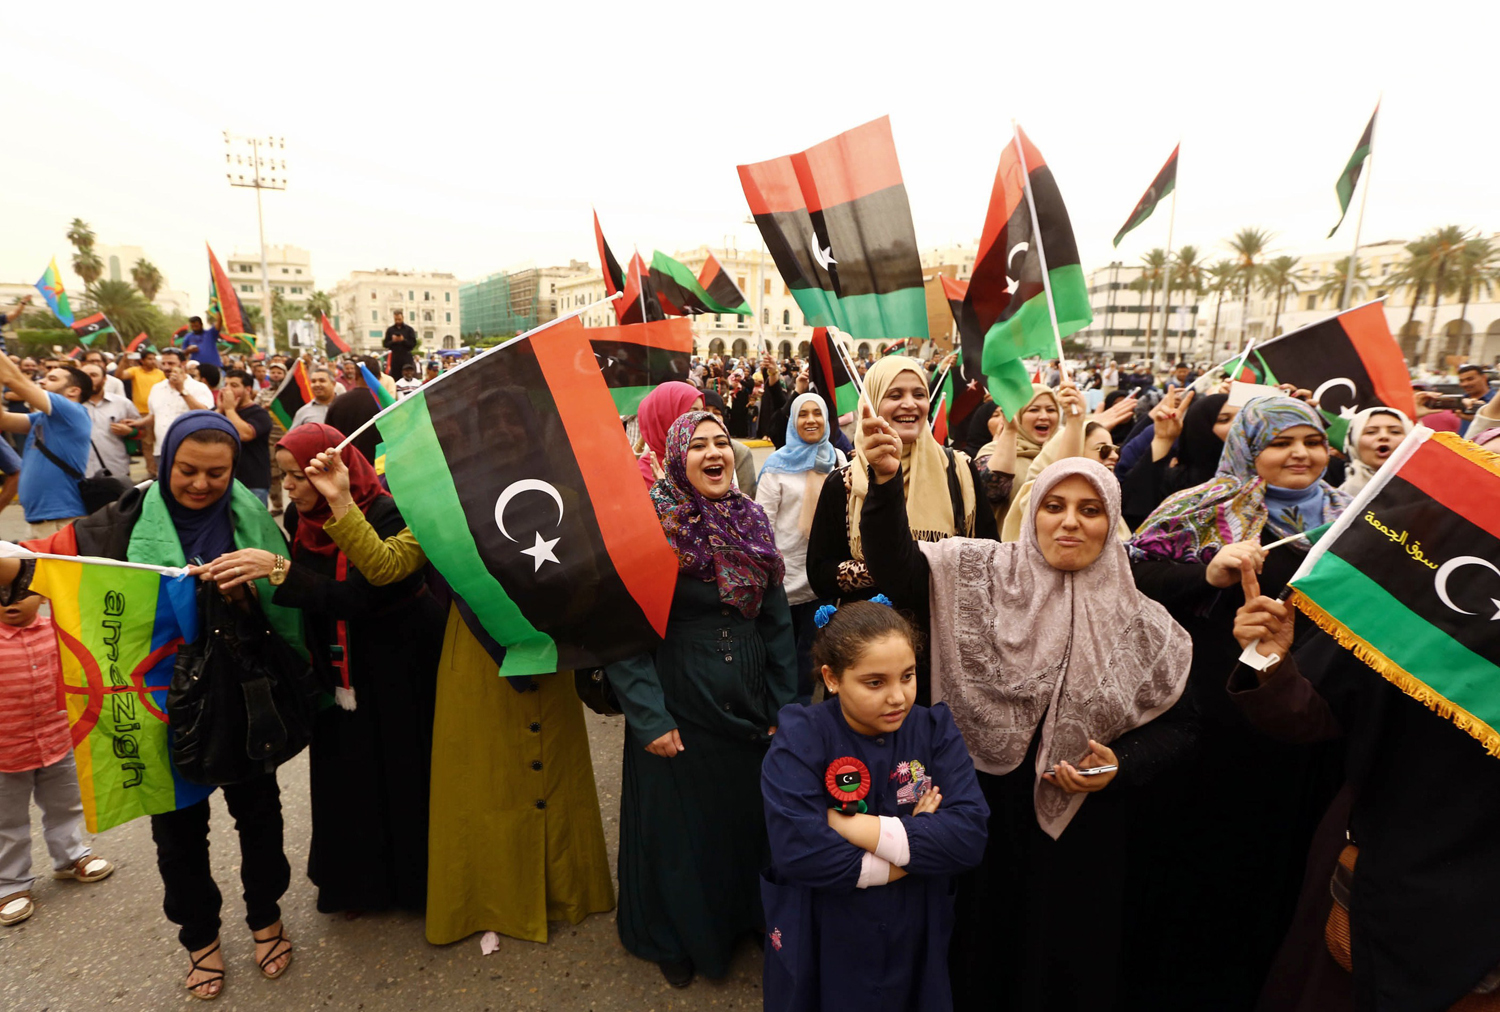 Libyans wave the national flag as they gather at Martyrs' Square to celebrate the decision of Libya's supreme court, in Tripoli on November 6, 2014. (Mahmud Turkia — AFP/Getty Images)